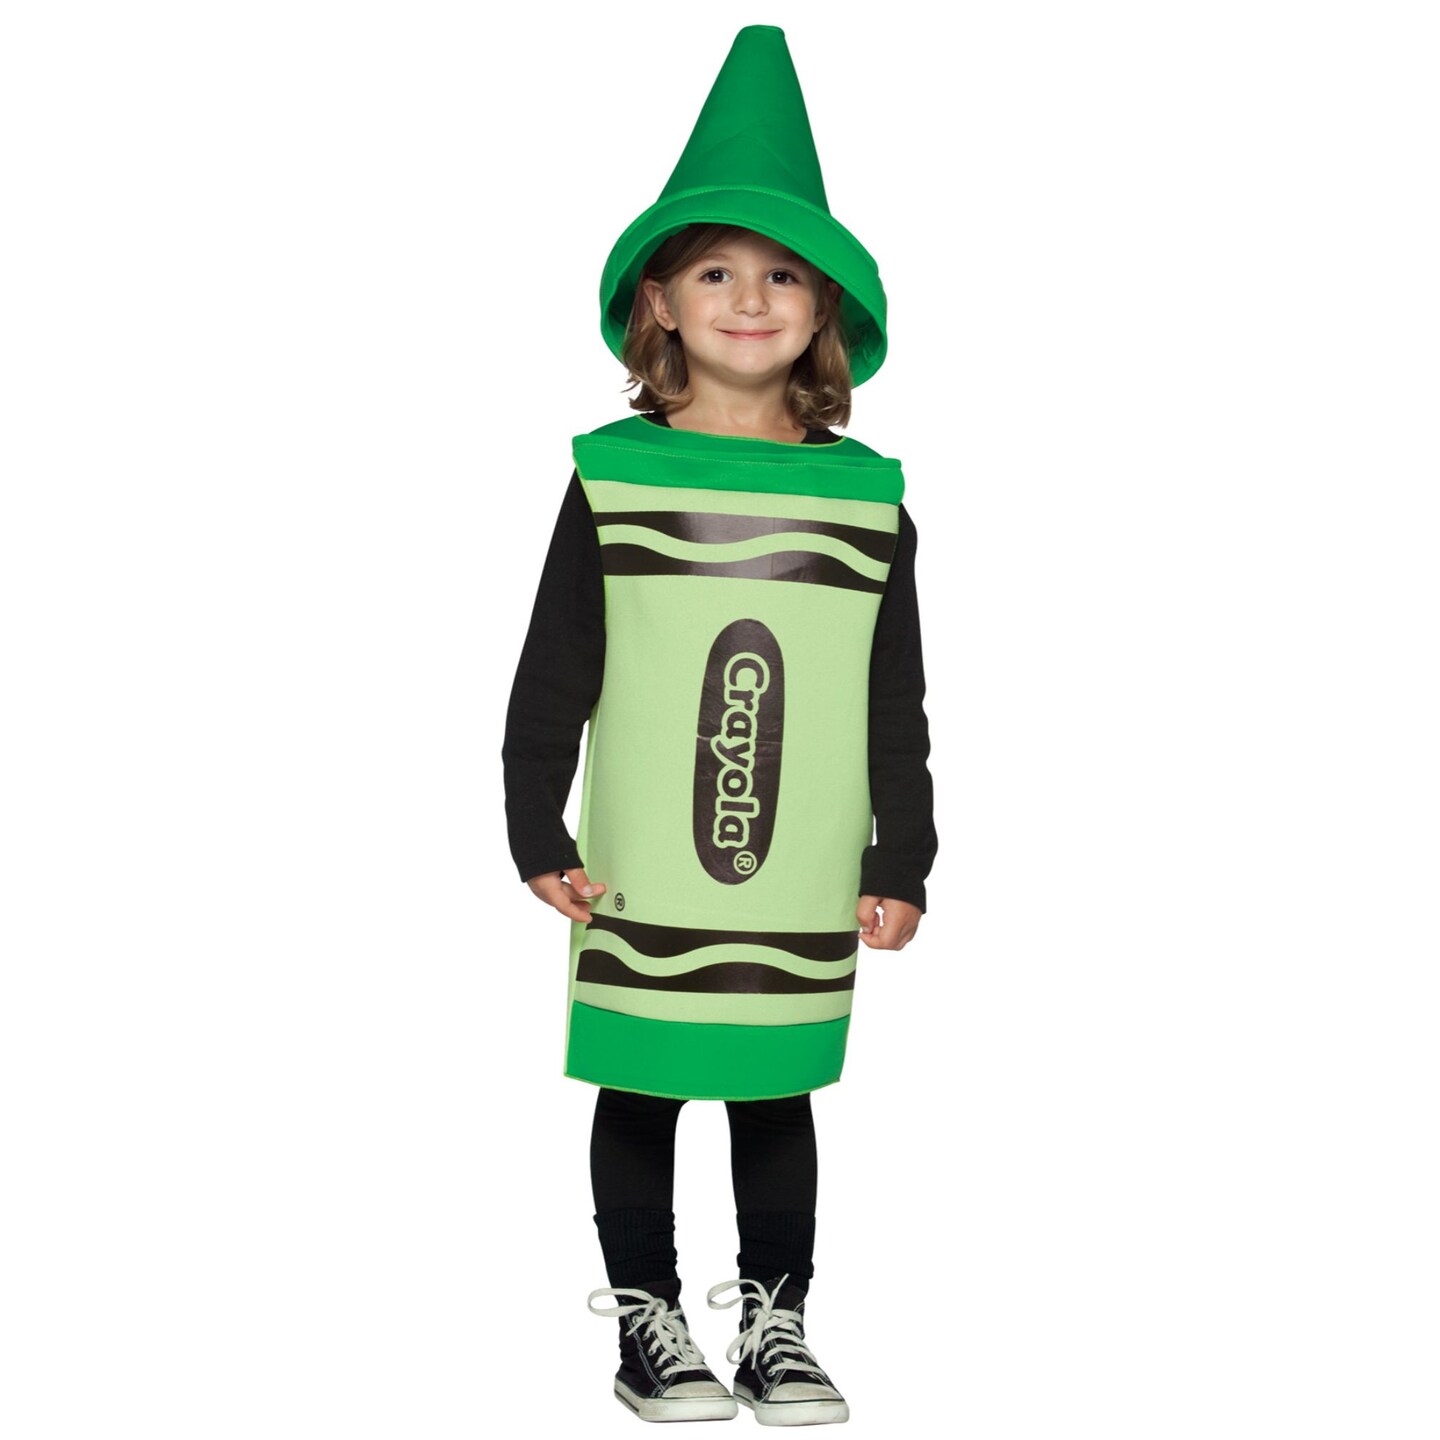 The Costume Center Green and Black Crayola Toddler Halloween Costume